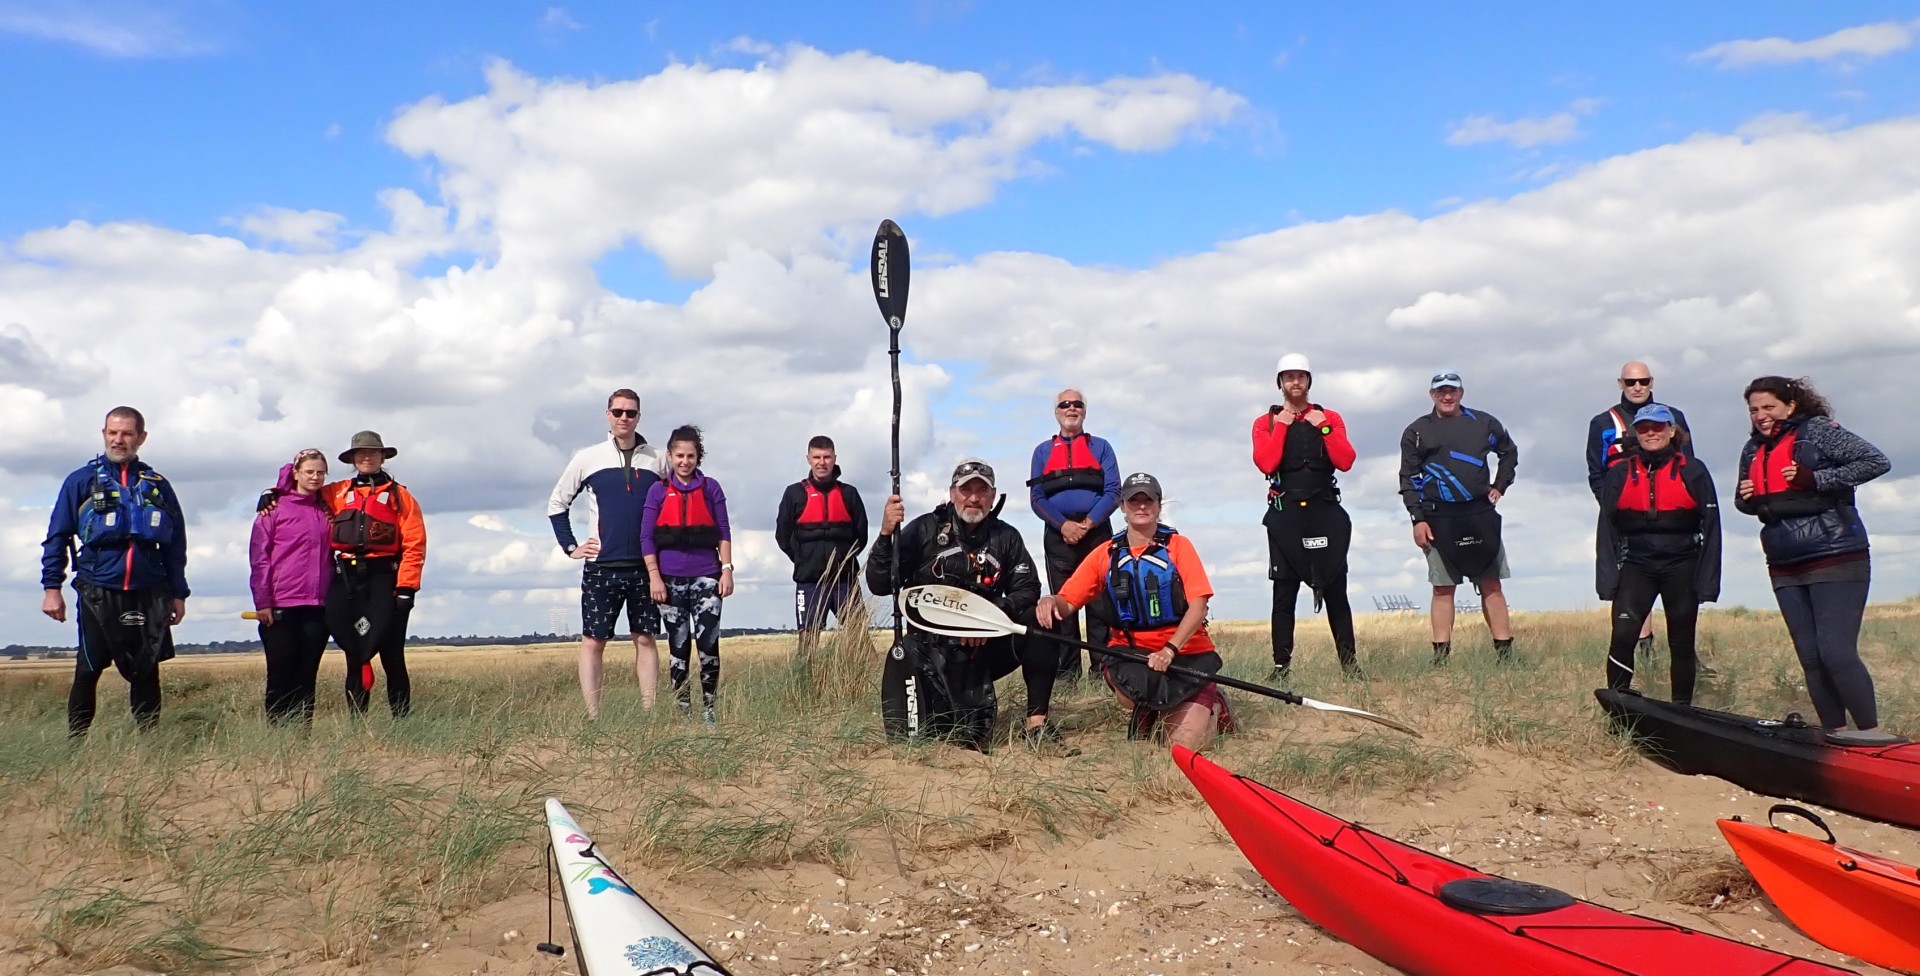 Group photo of kayakers on the beach.